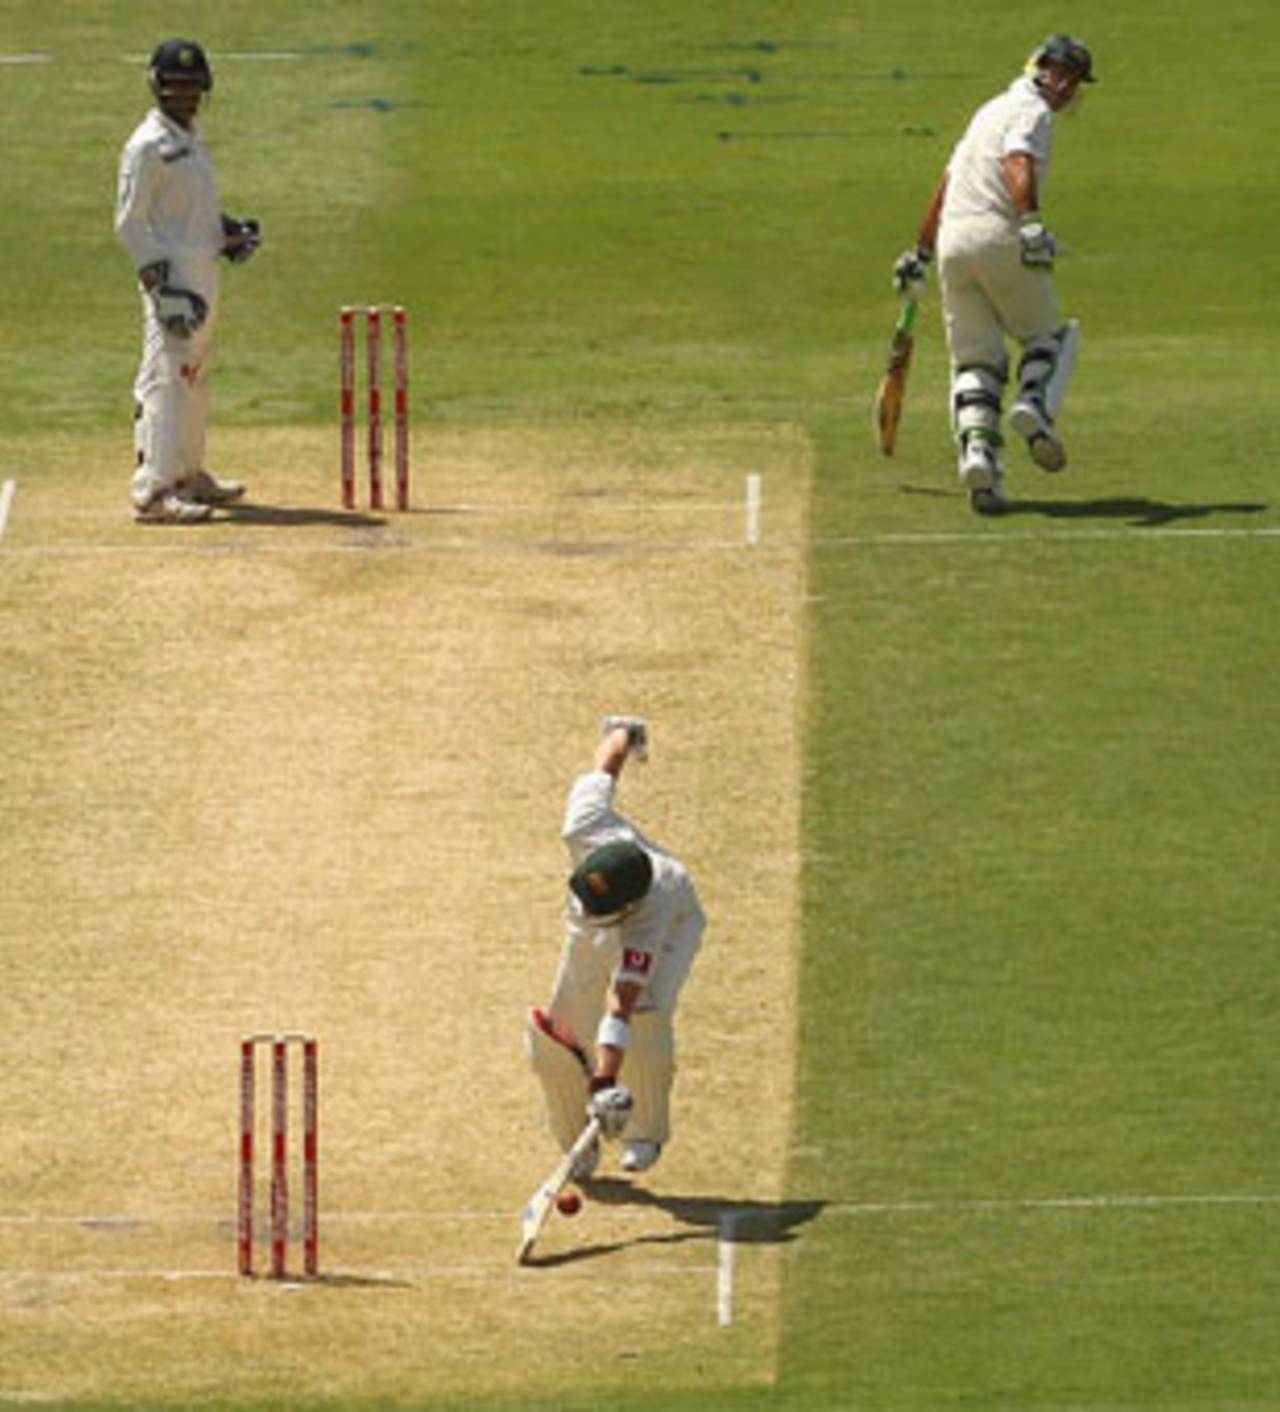 There was an appeal for obstructing the field against Michael Clarke, Australia v India, 4th Test, Adelaide, 1st day, January 24, 2012